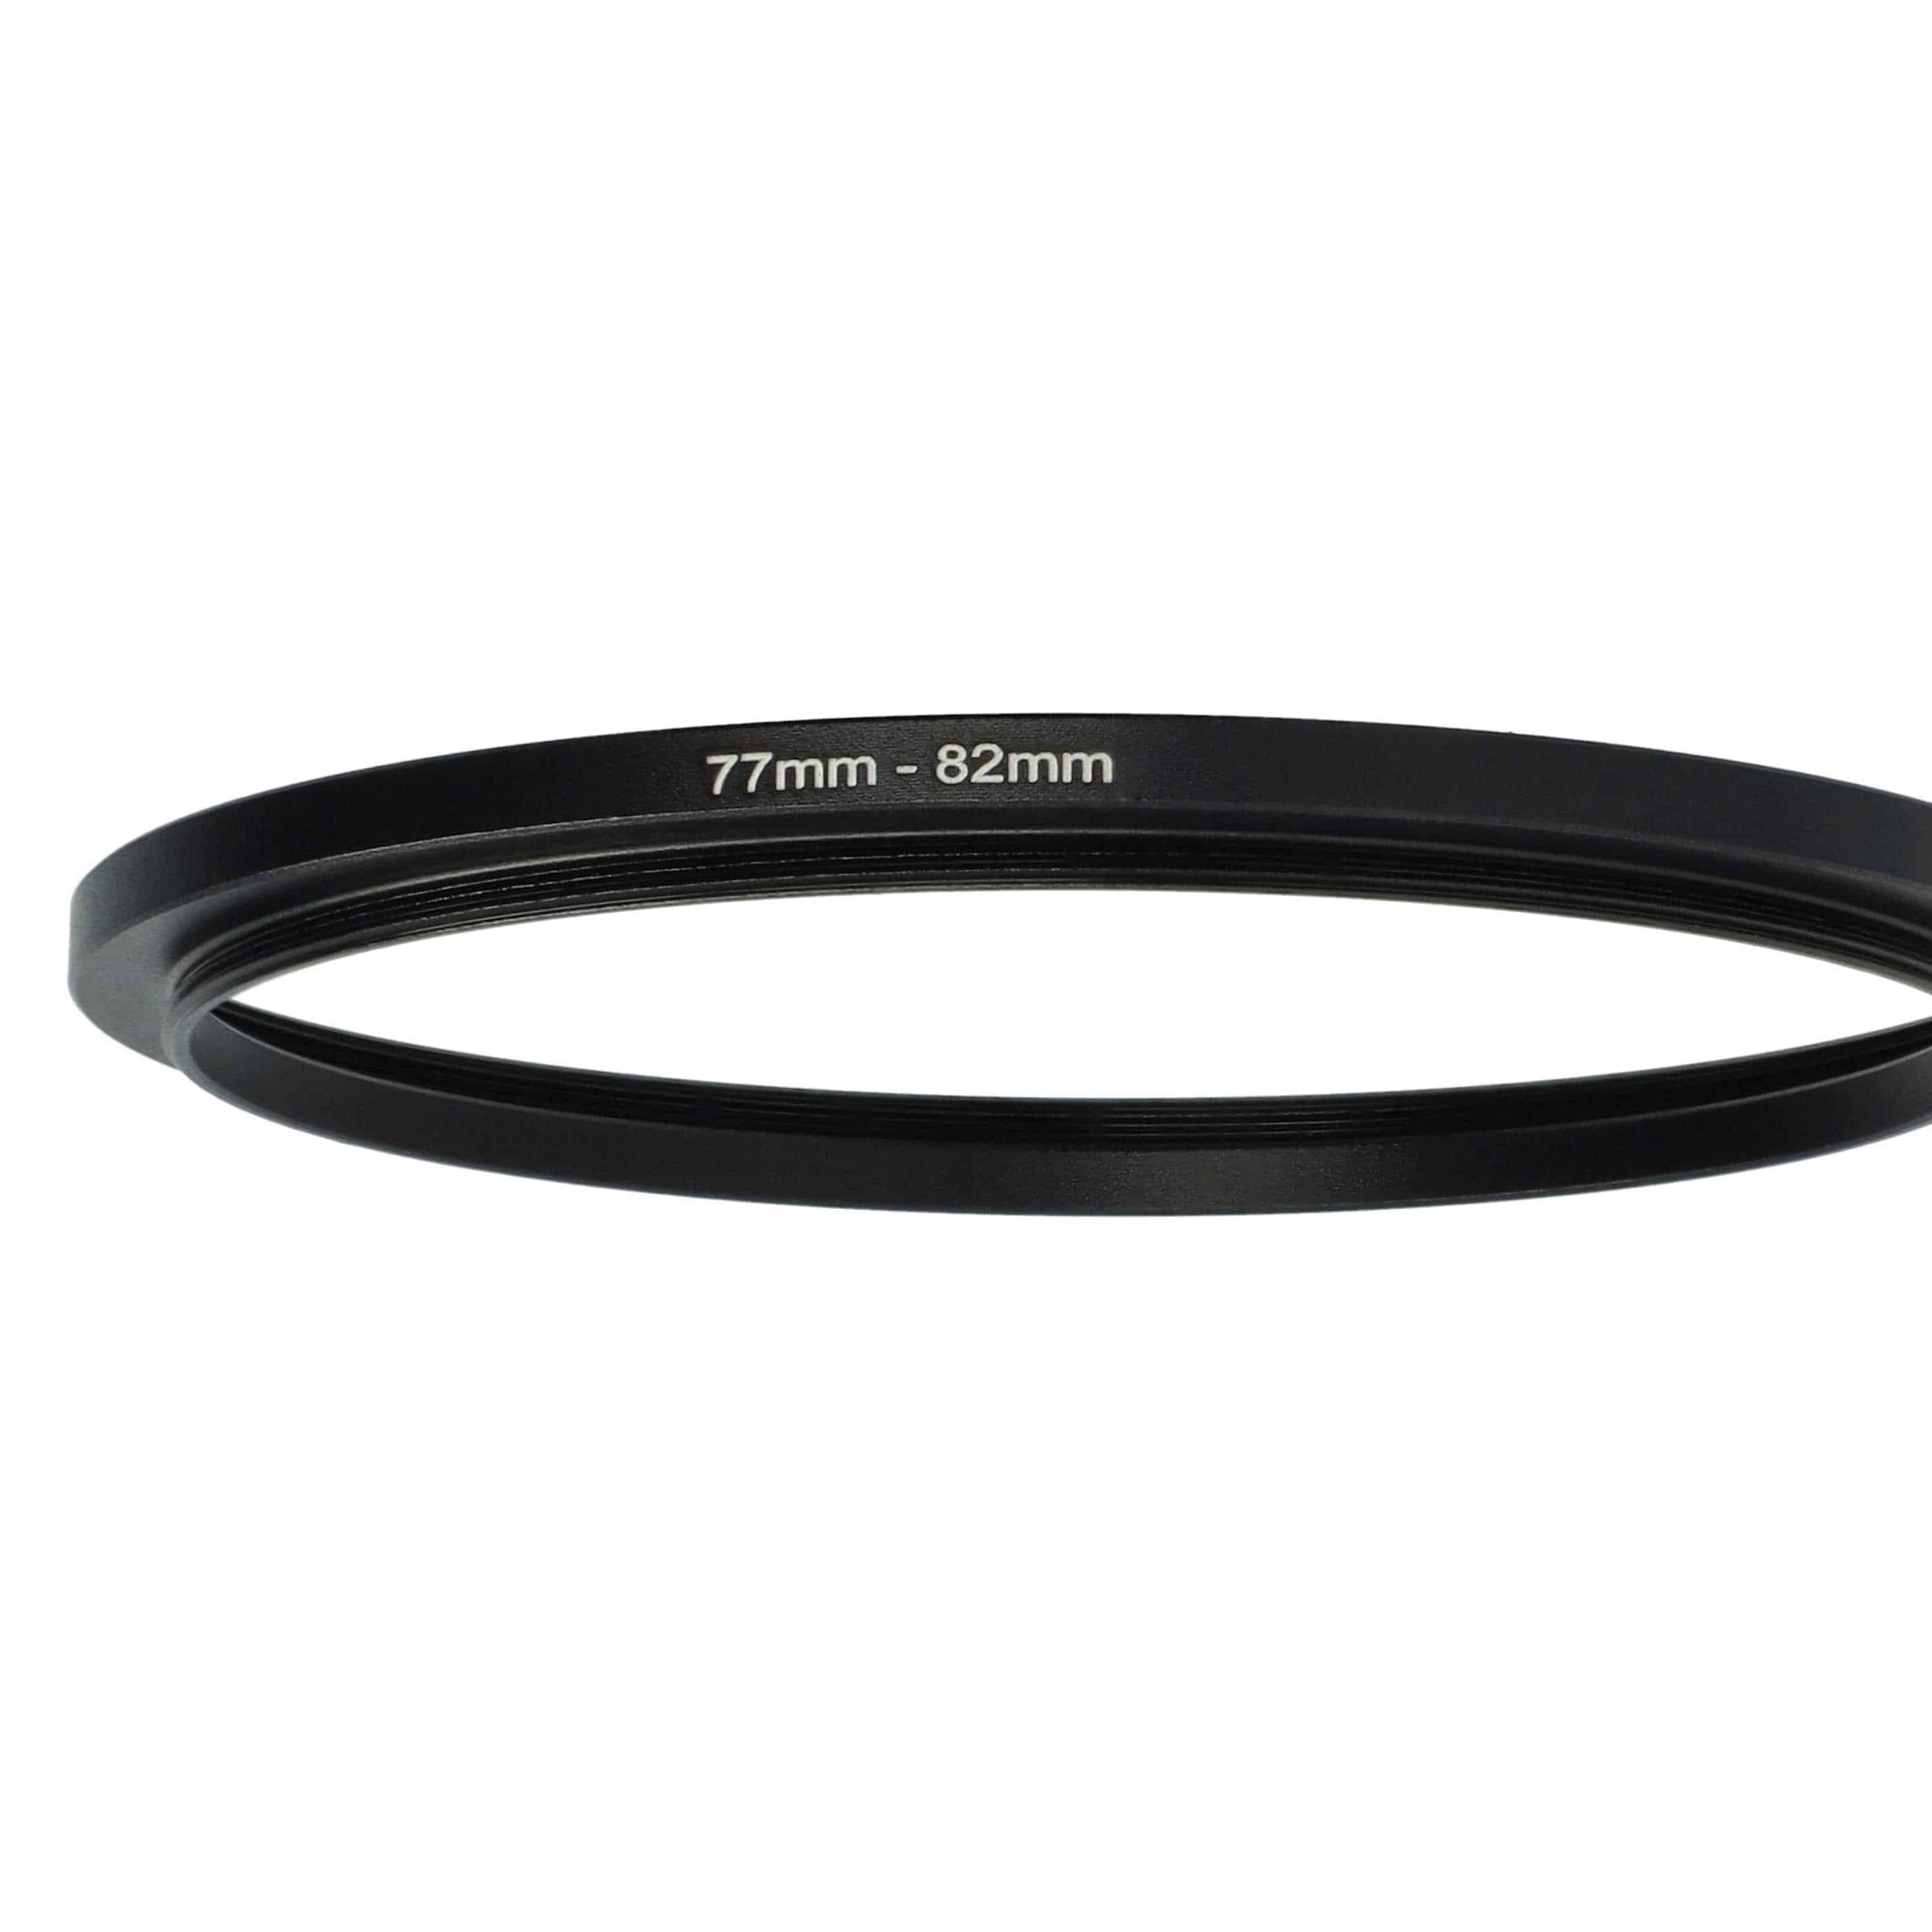 Step-Up Ring Adapter of 77 mm to 82 mmfor various Camera Lens - Filter Adapter